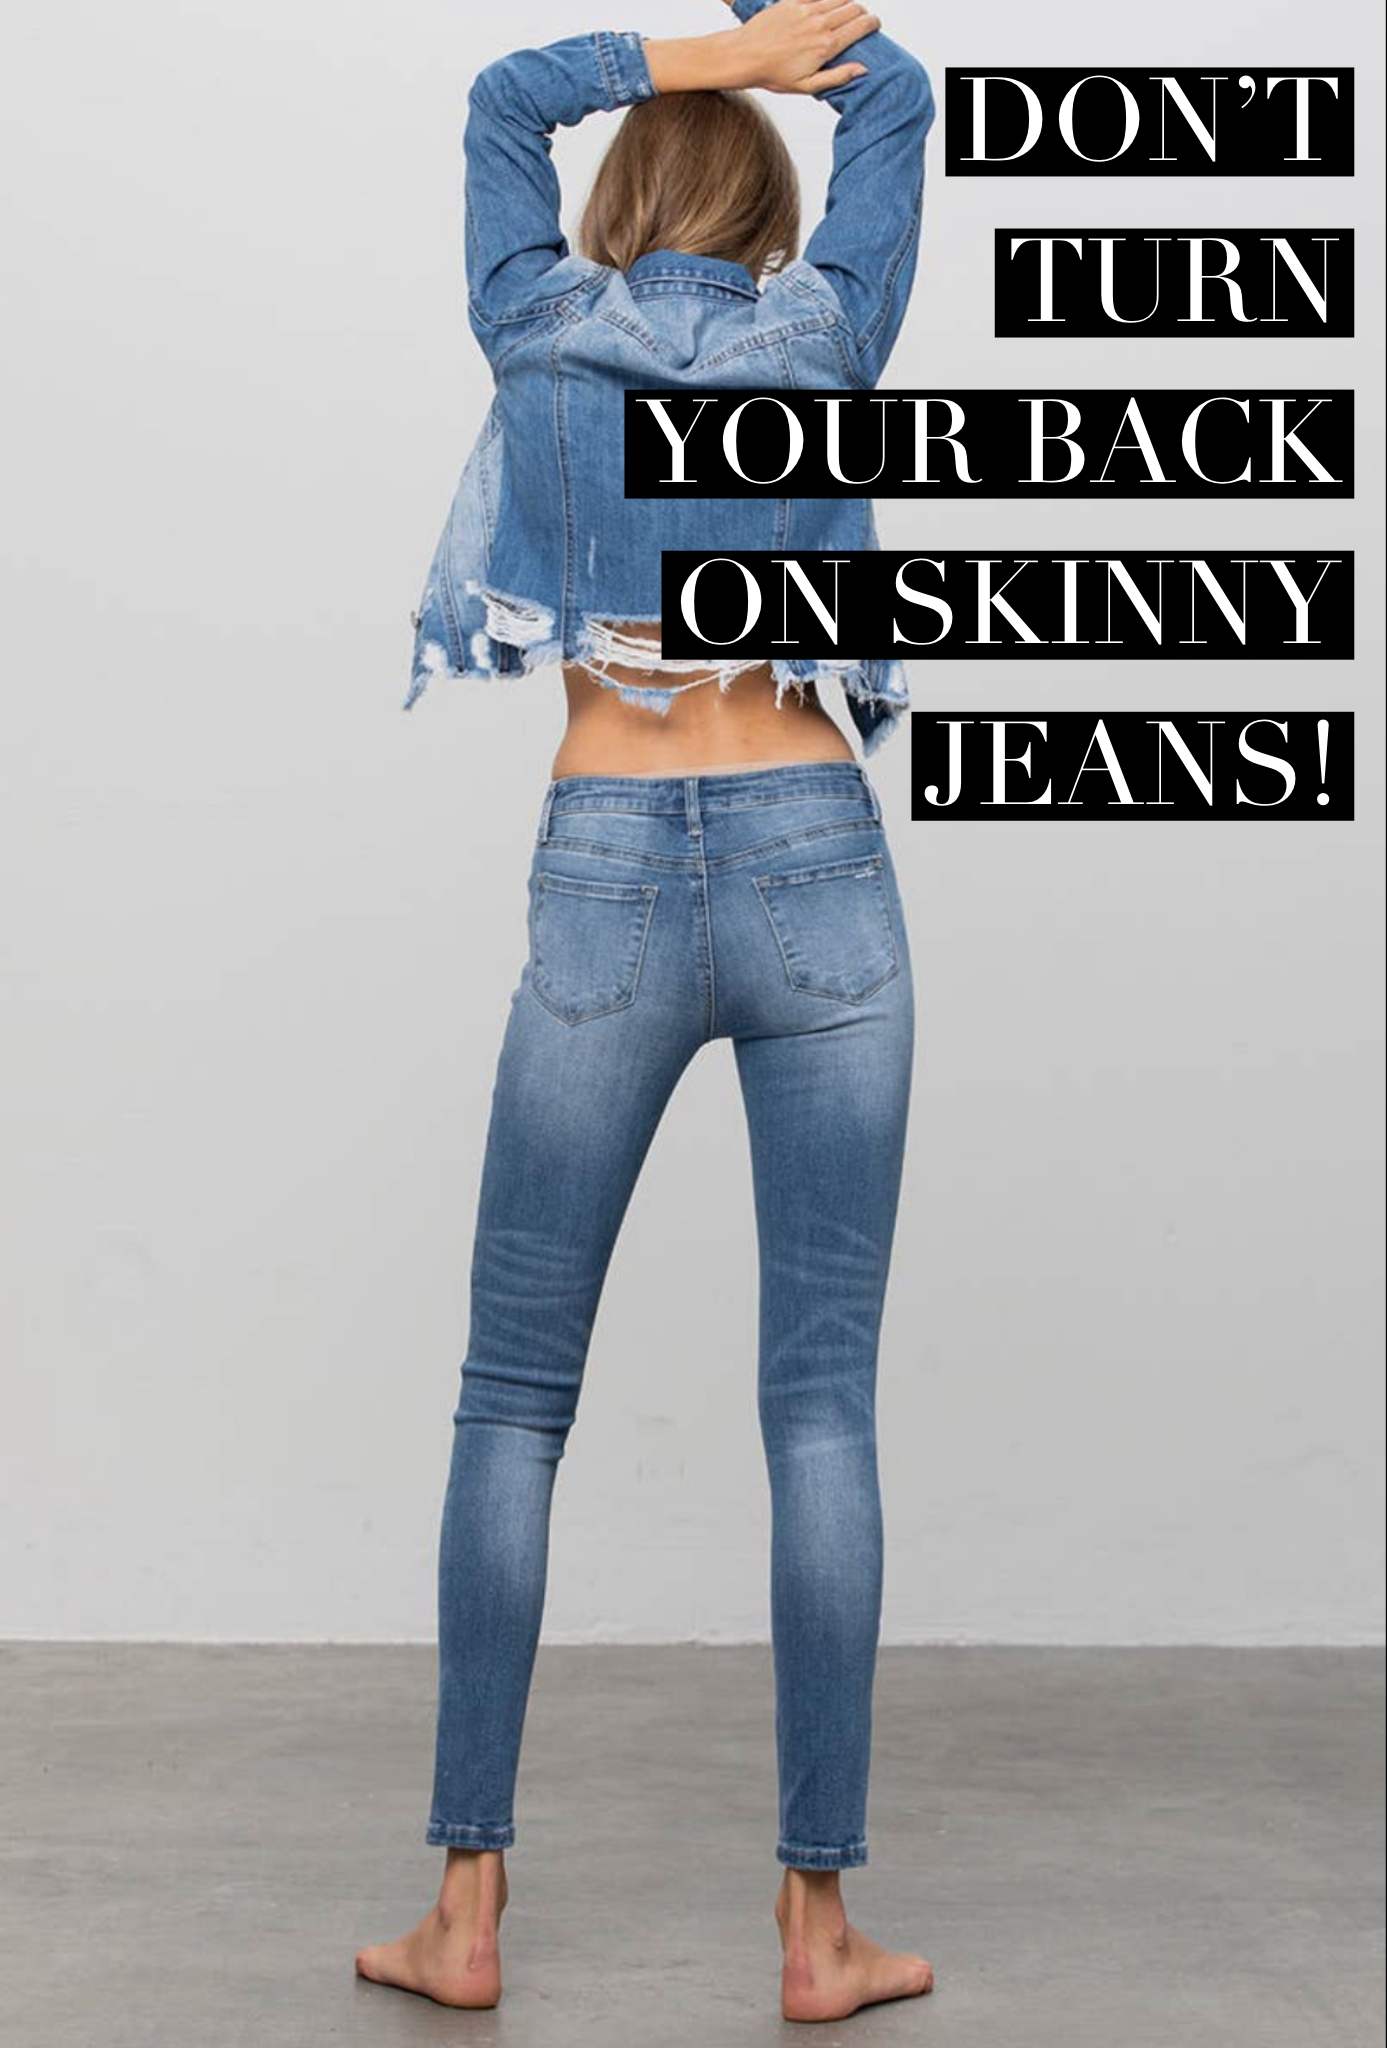 What’s the Skinny on Skinny Jeans?